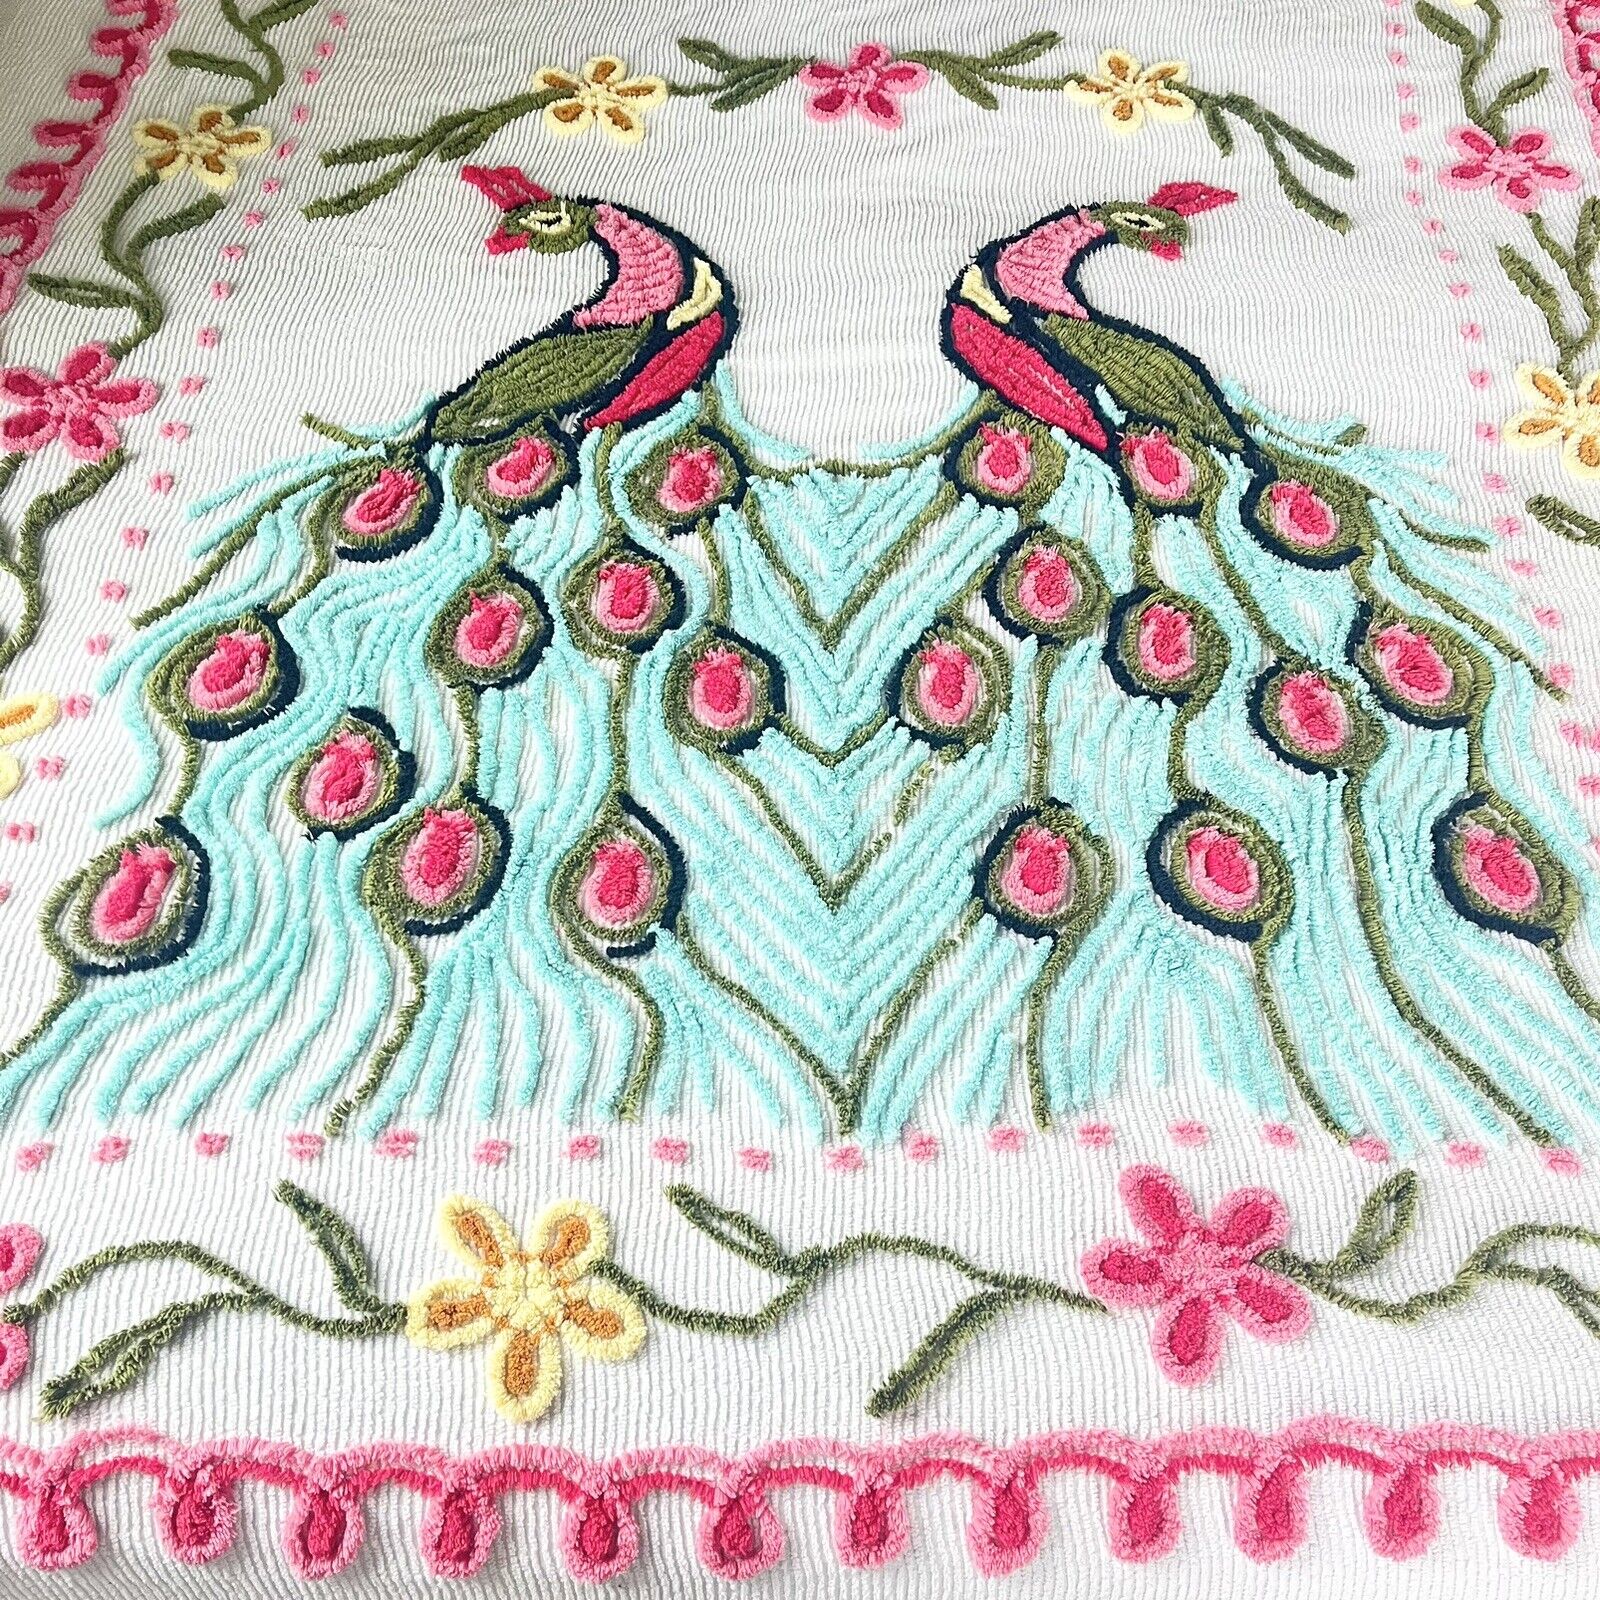 Vintage Chenille PEACOCK Flowers Bedspread 90x100” White Coverlet Pink Aqua